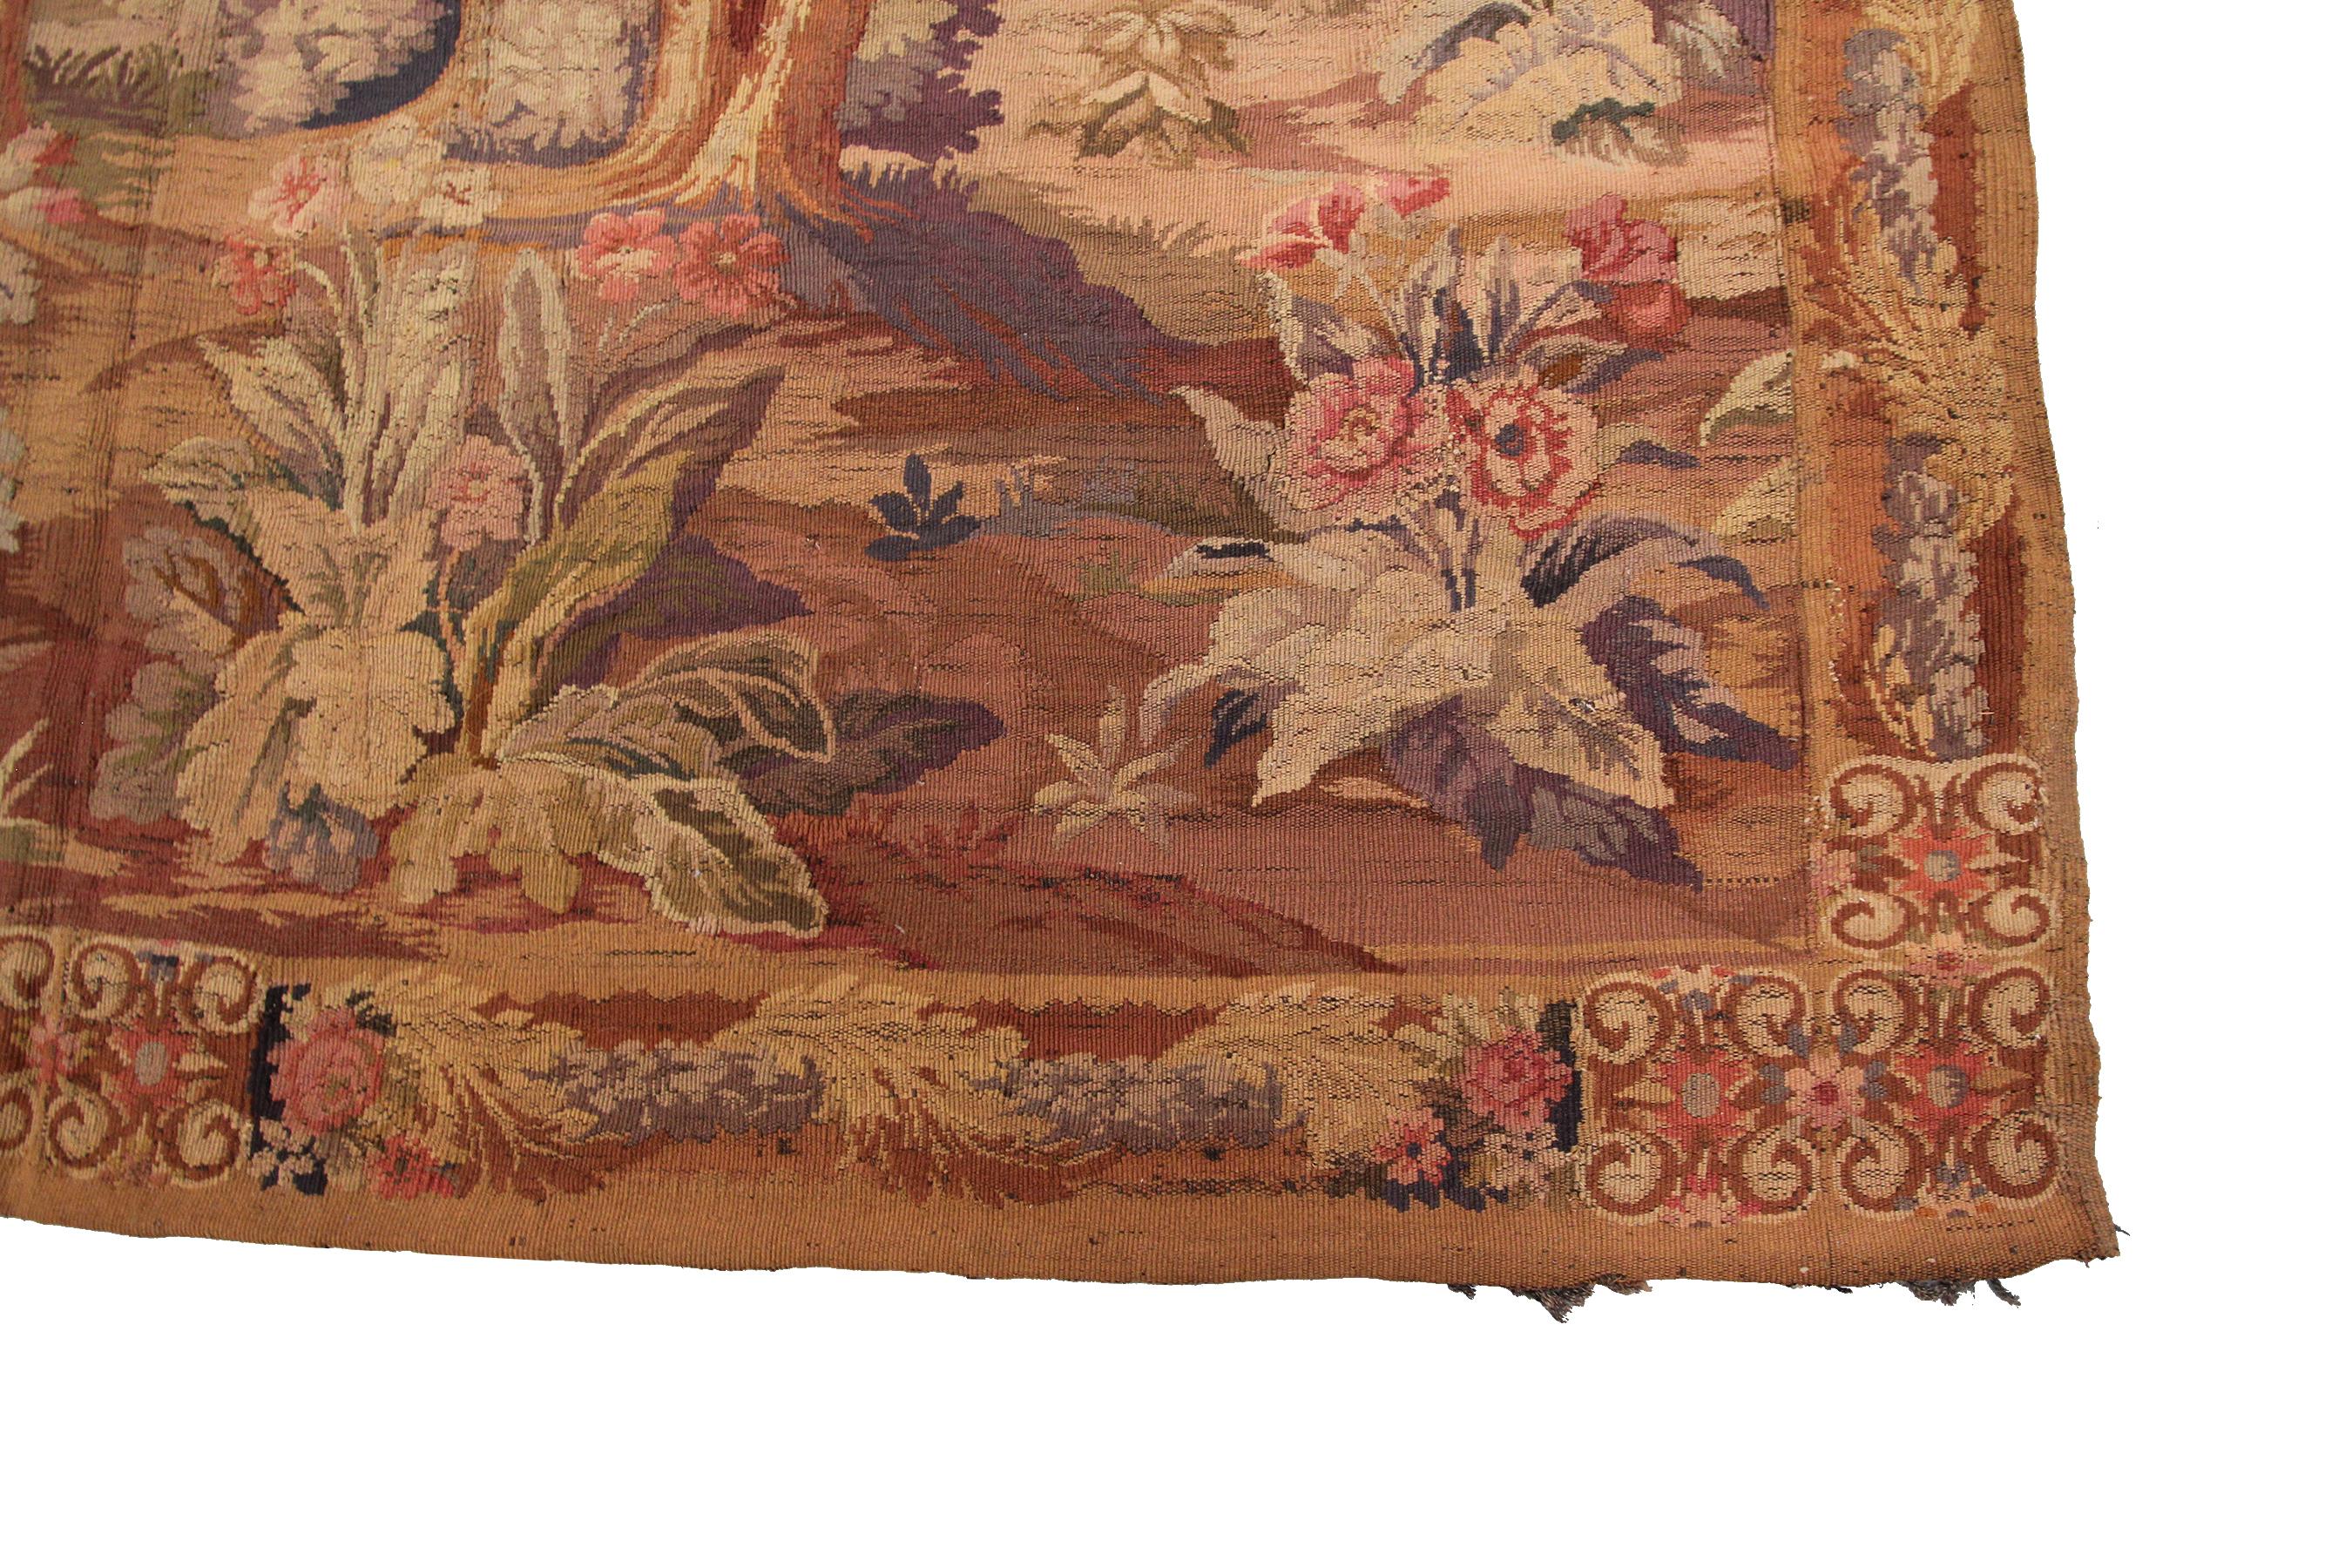 French Provincial Antique Tapestry Antique French Tapestry Large Tapestry, 1900